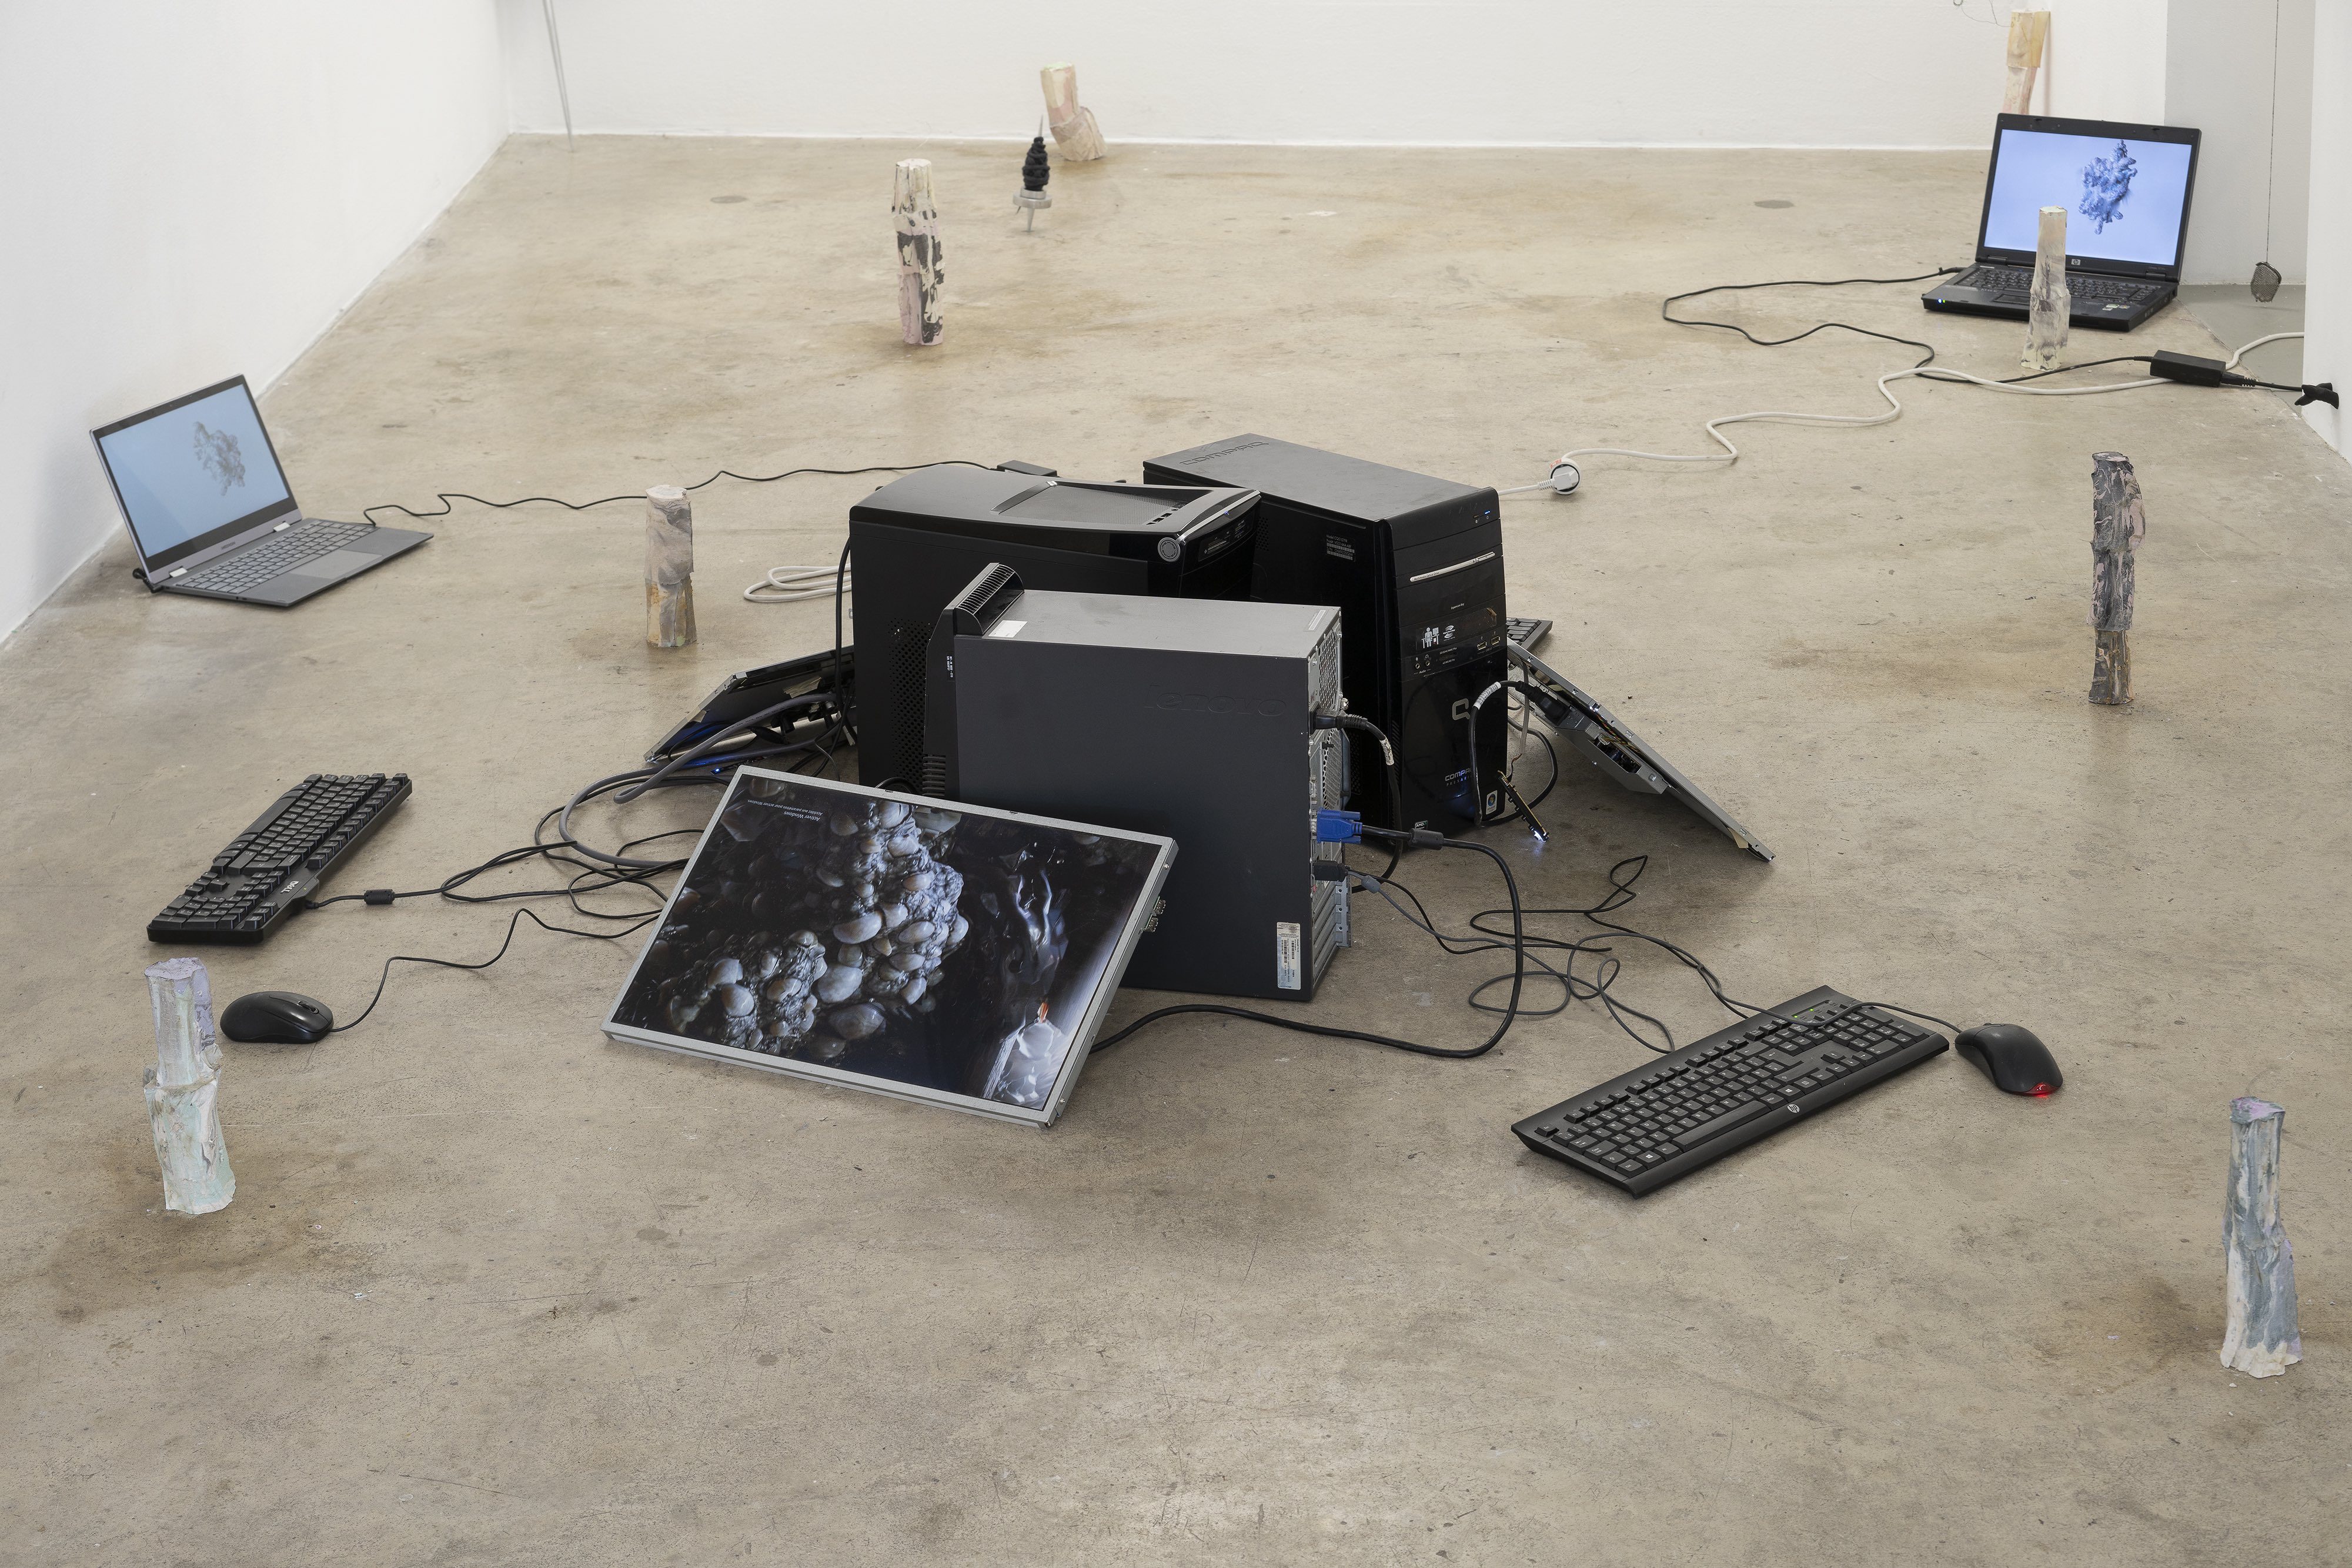 Installation View, center: Schwarm by Joerg Hurschler, 8 digital animations running on 5 laptops, 3 computer towers, 3 screens, 3 keyboards, 3 mice, various cables, 2023 left/right:  just do it by gousgous, cement, pigments, wire, various sizes, 2023